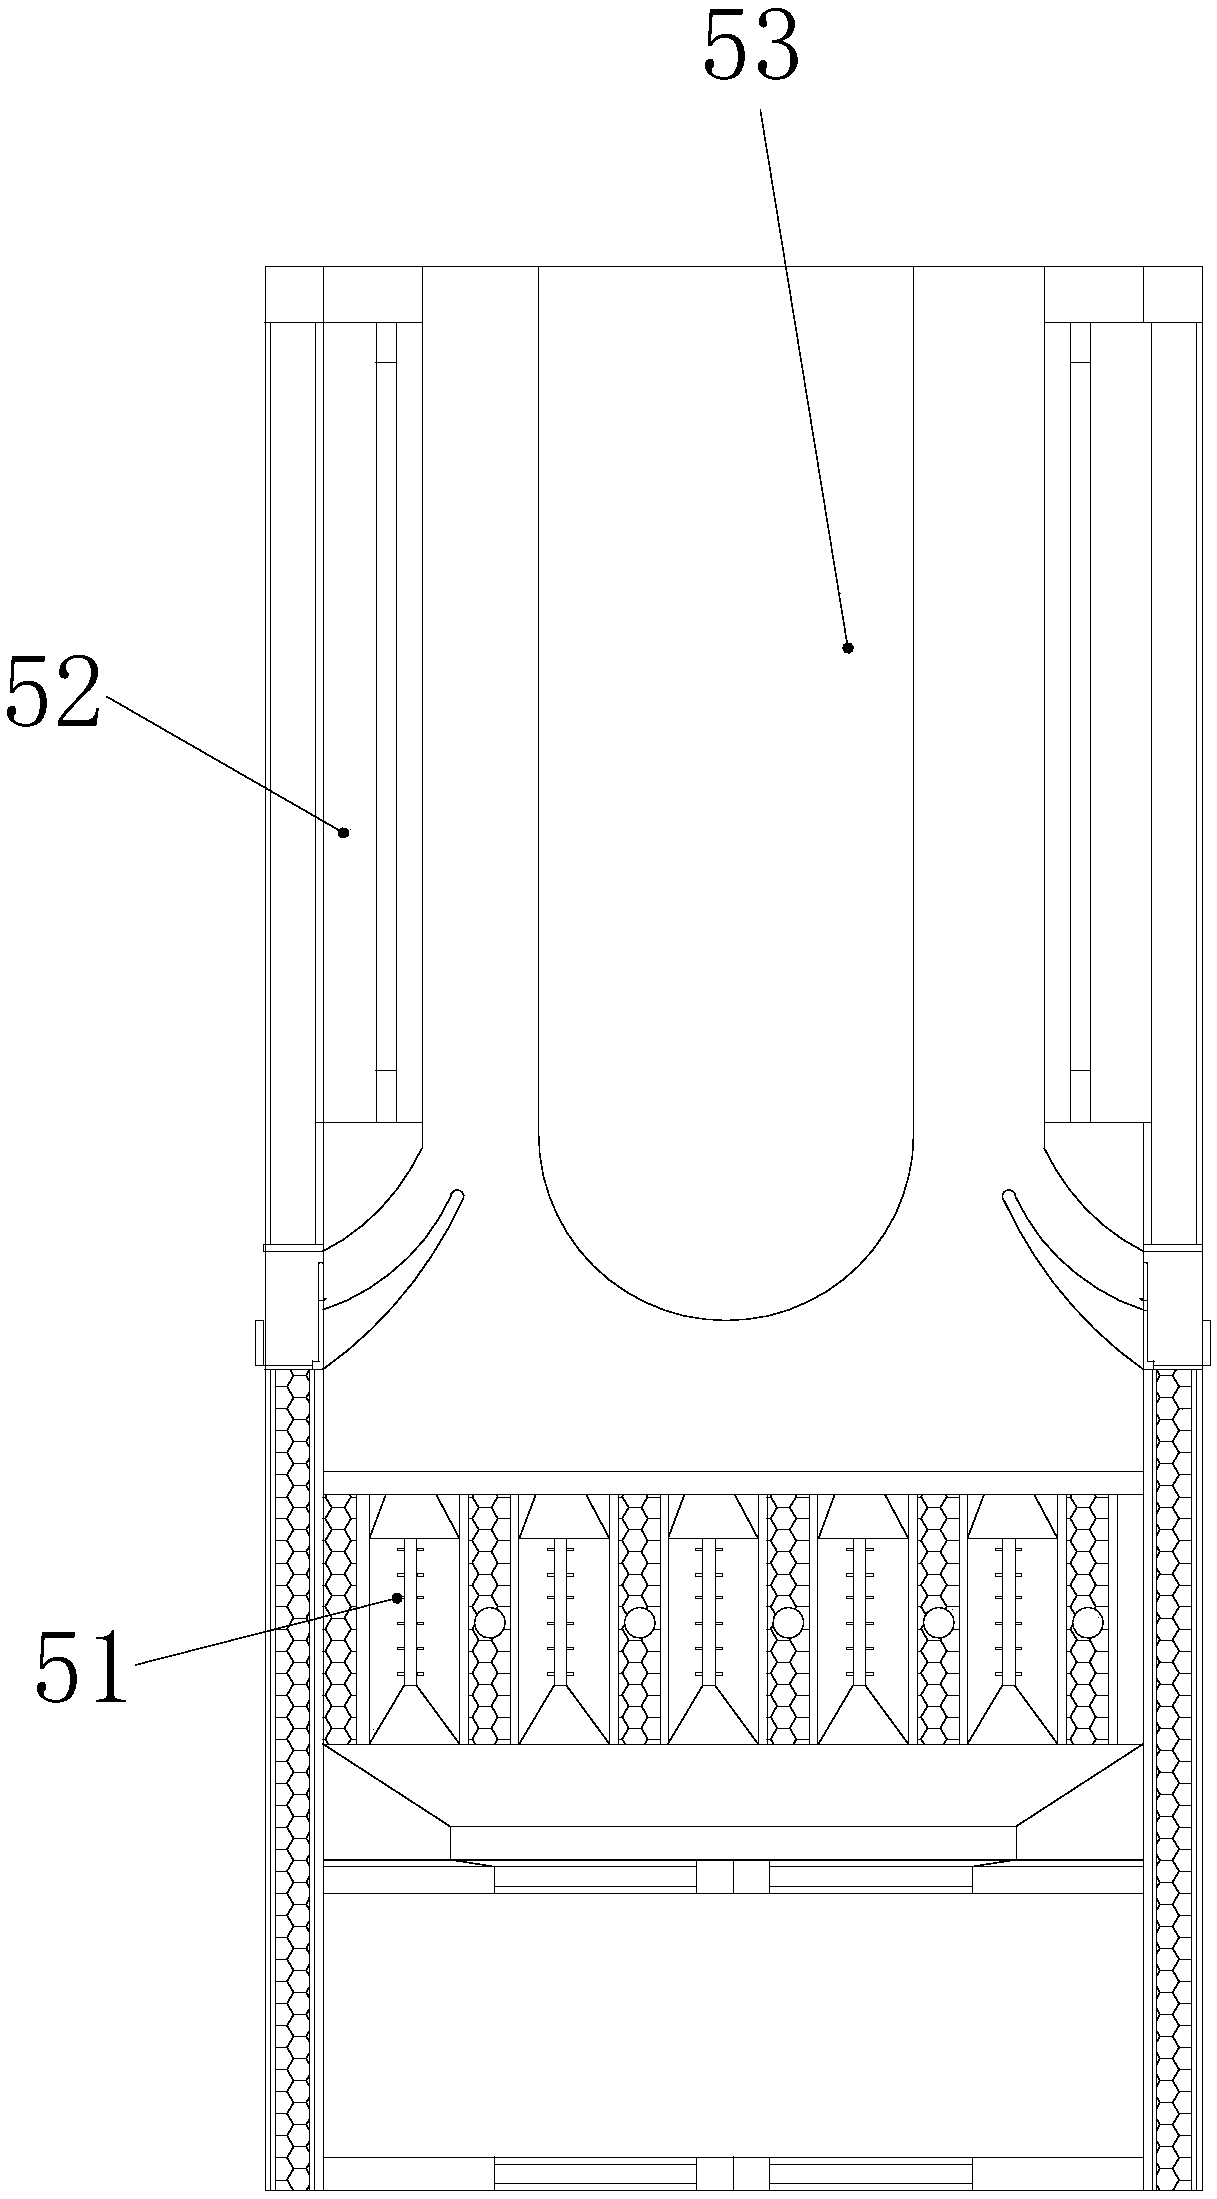 Environmental-friendly chimney device for removing stains of inner wall in manner of heating and circulating water vapor by waste gas afterheat